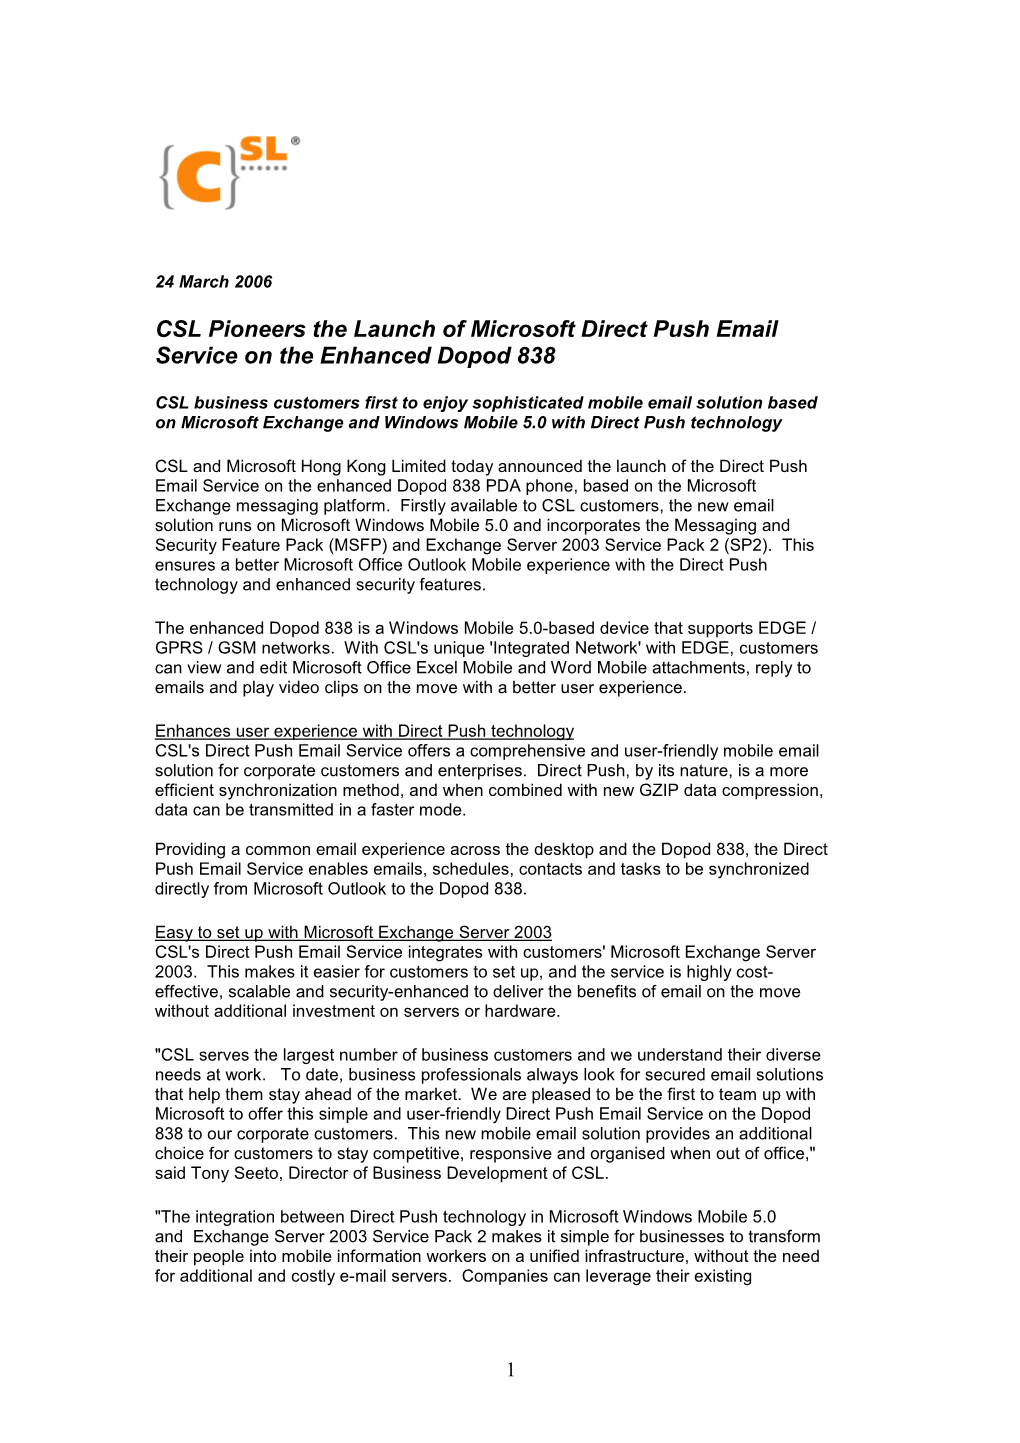 CSL Pioneers the Launch of Microsoft Direct Push Email Service on the Enhanced Dopod 838